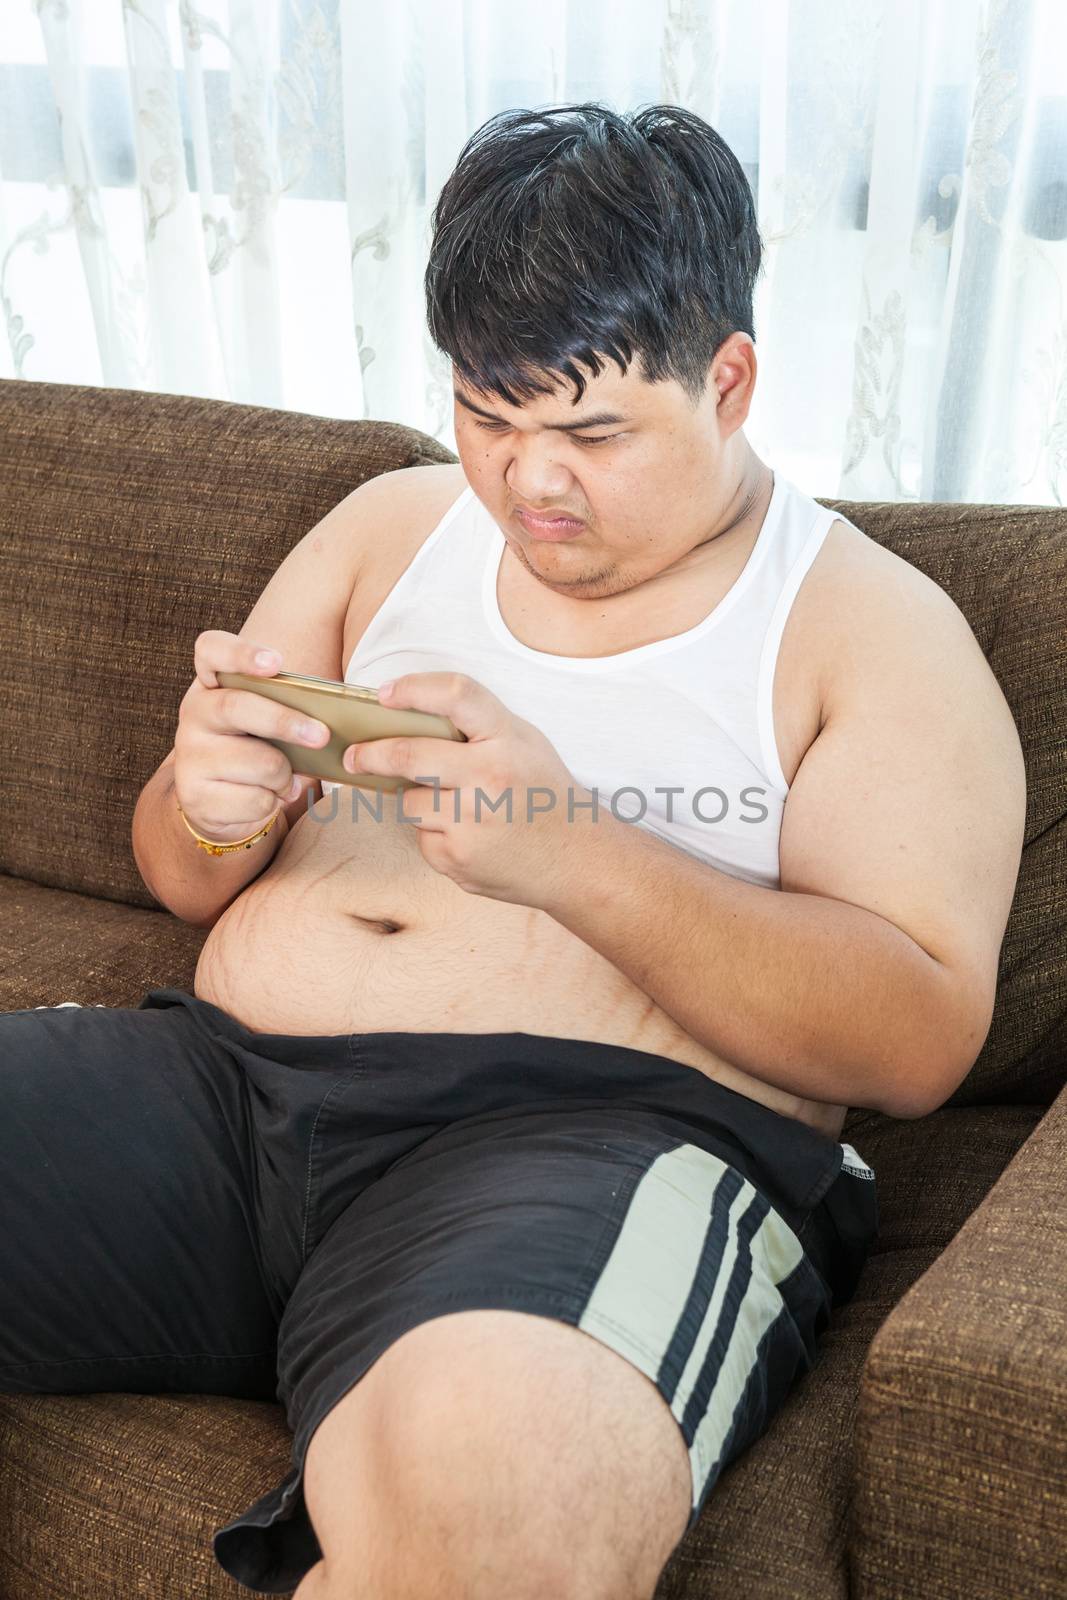 Fat asian man play game with his smartphone